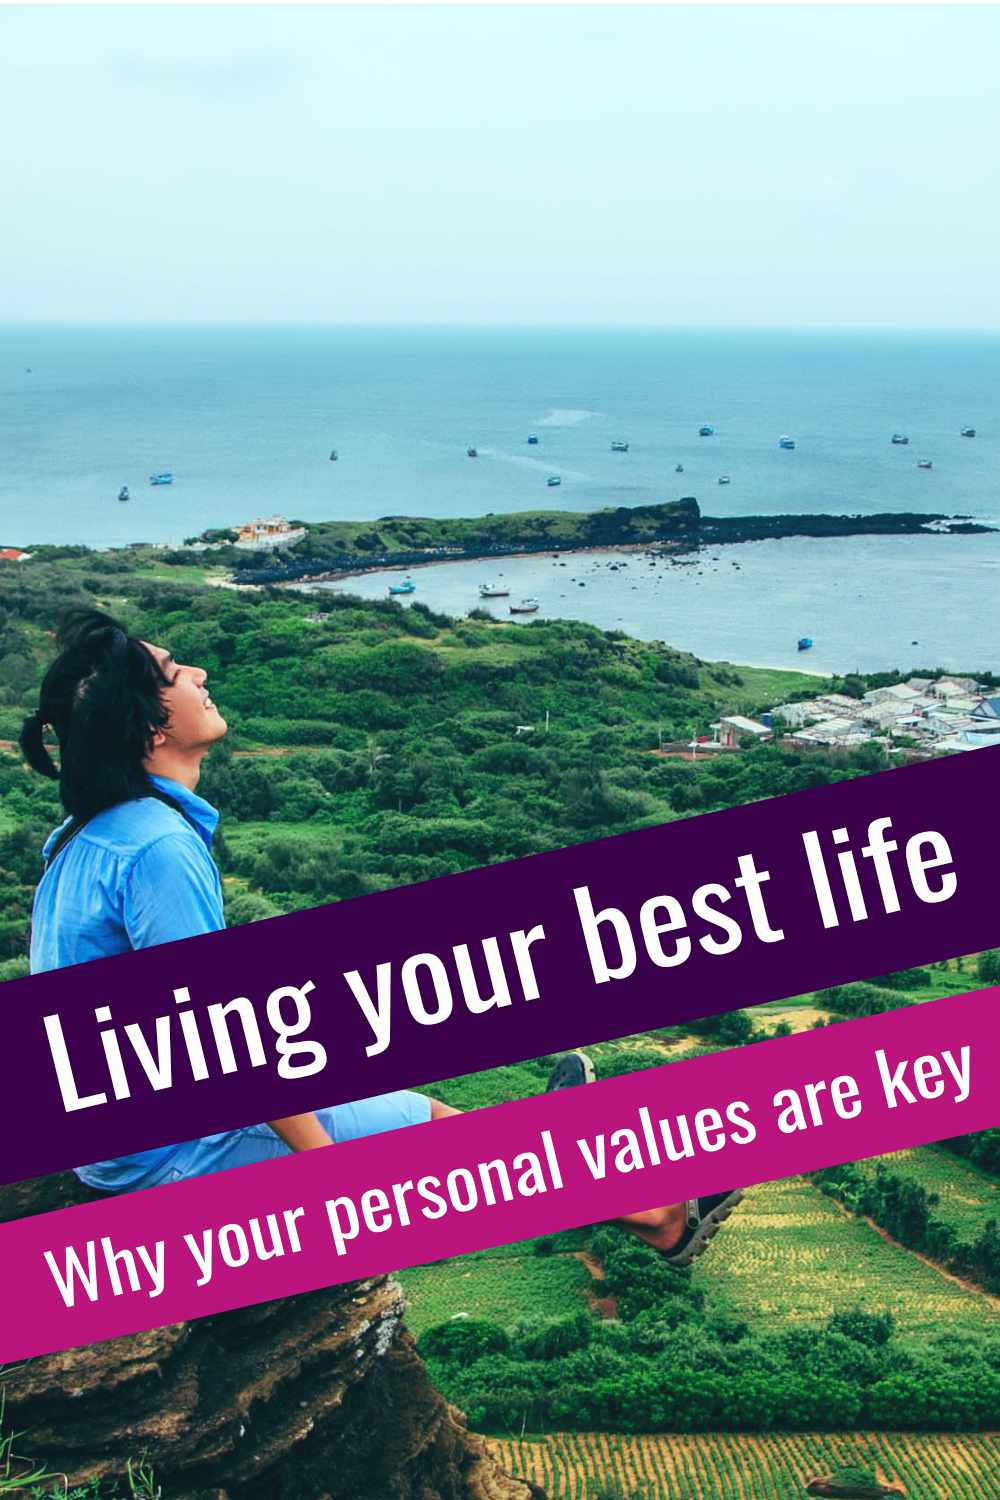 Social media images that says Living your best life, why your personal values are key